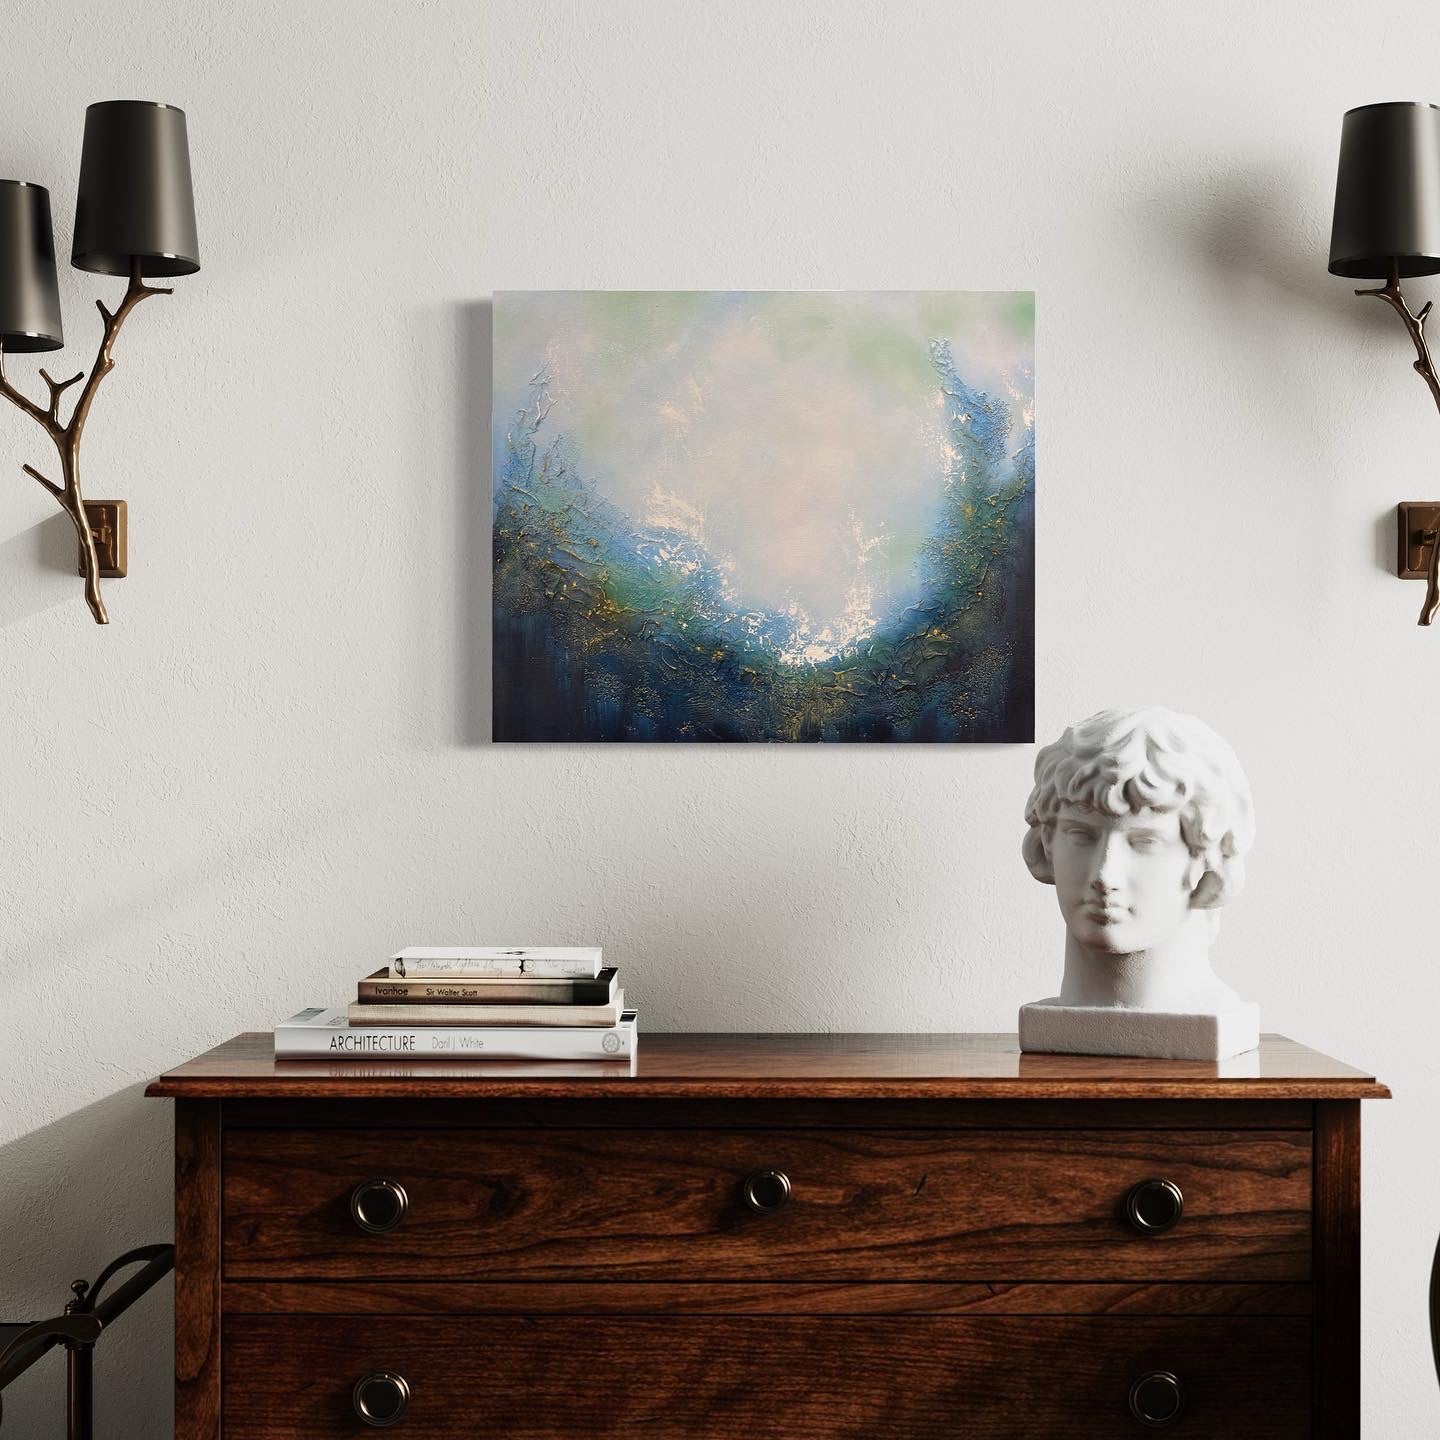 This stunning original abstract painting evokes a feeling of soulful peace and beckons a return to your spiritual center. Dive in and explore this portal which invites personal reflection with its powerful imagery of a magical portal opening up to a realm of endless possibilities. Painting hangs over a wooden credenza with marble bust and books, with wall lamps on either side shaped like tree limbs.